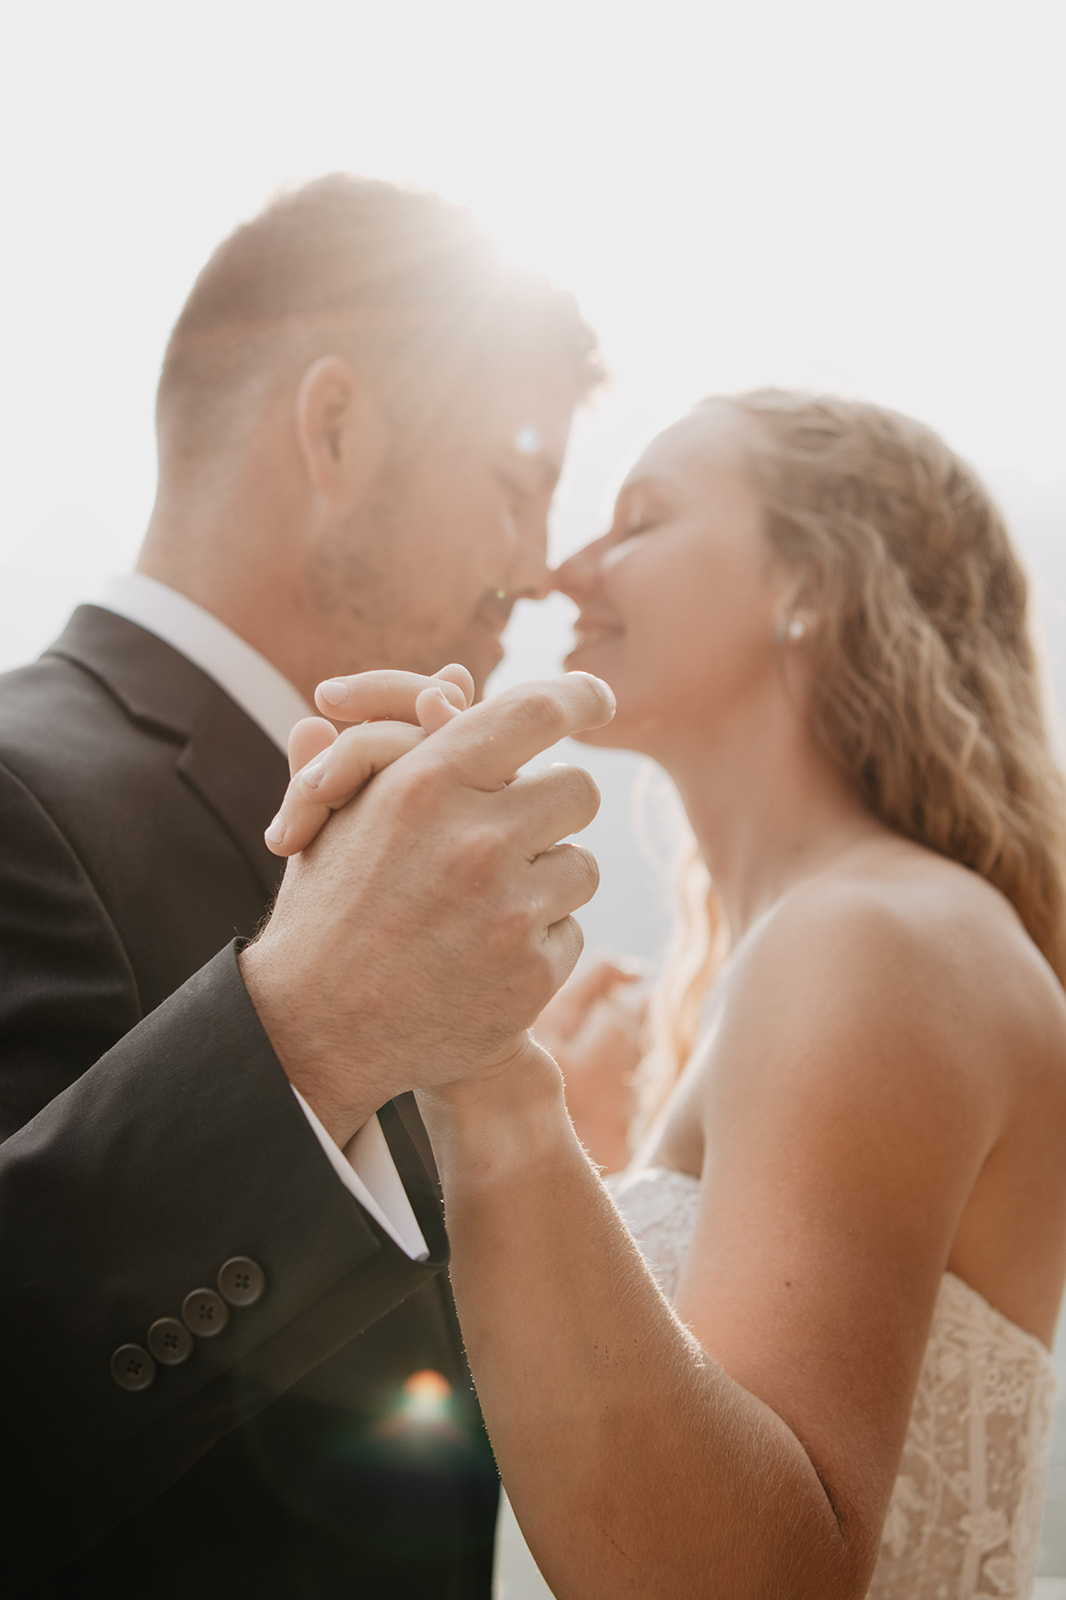 plan your elopement in 6 months with JAckson Hole wedding photographer, image of bride and groom holding hands and touching their noses together as the sun beams behind them